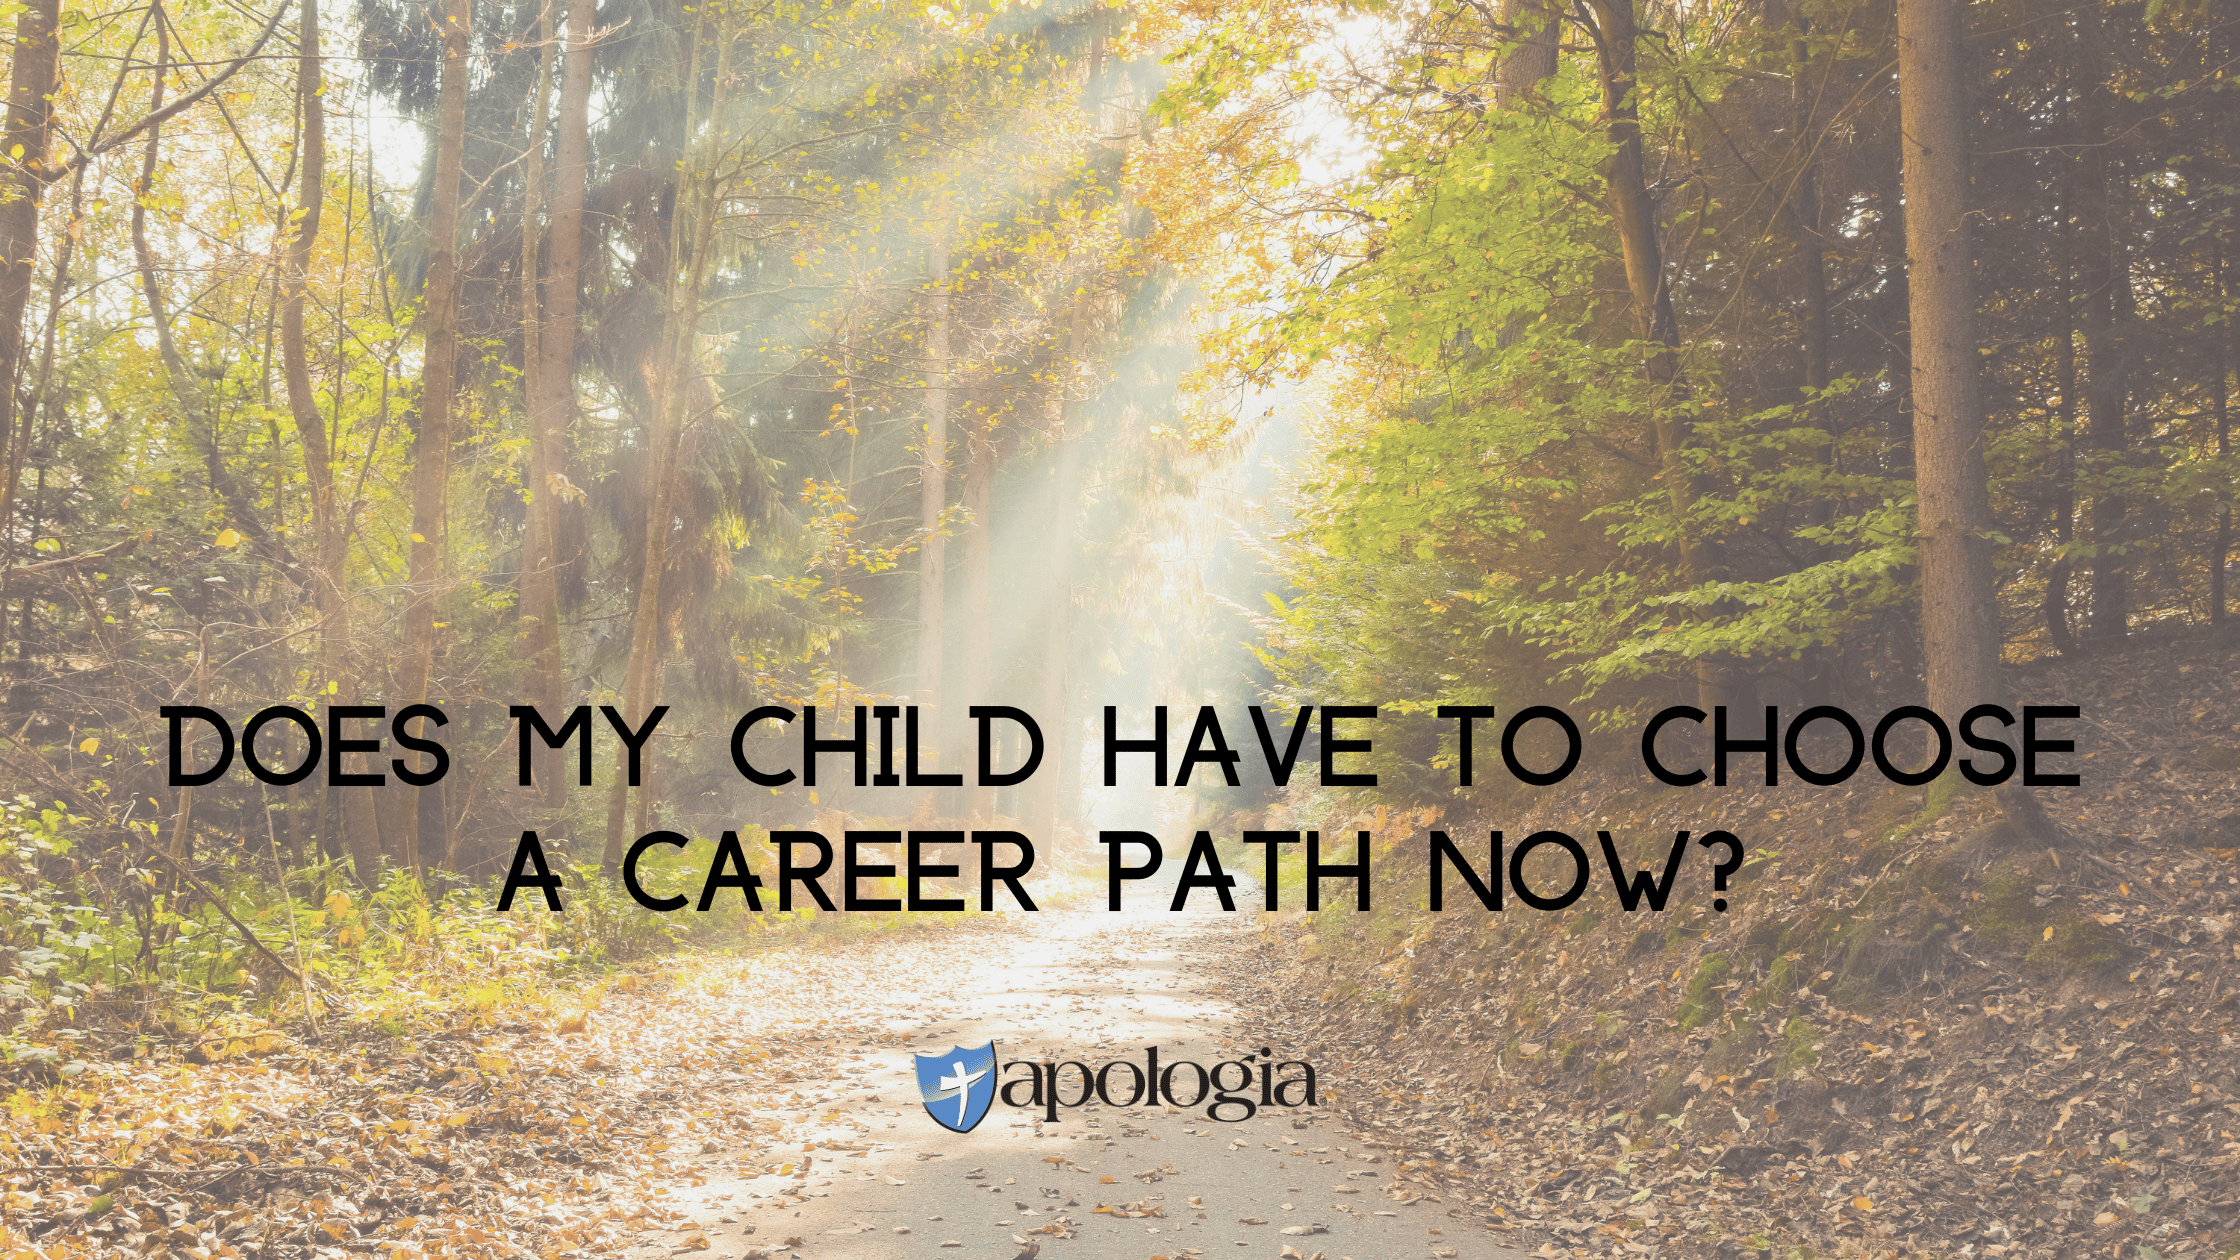 Does My Child Have to Choose a Career Path NOW?